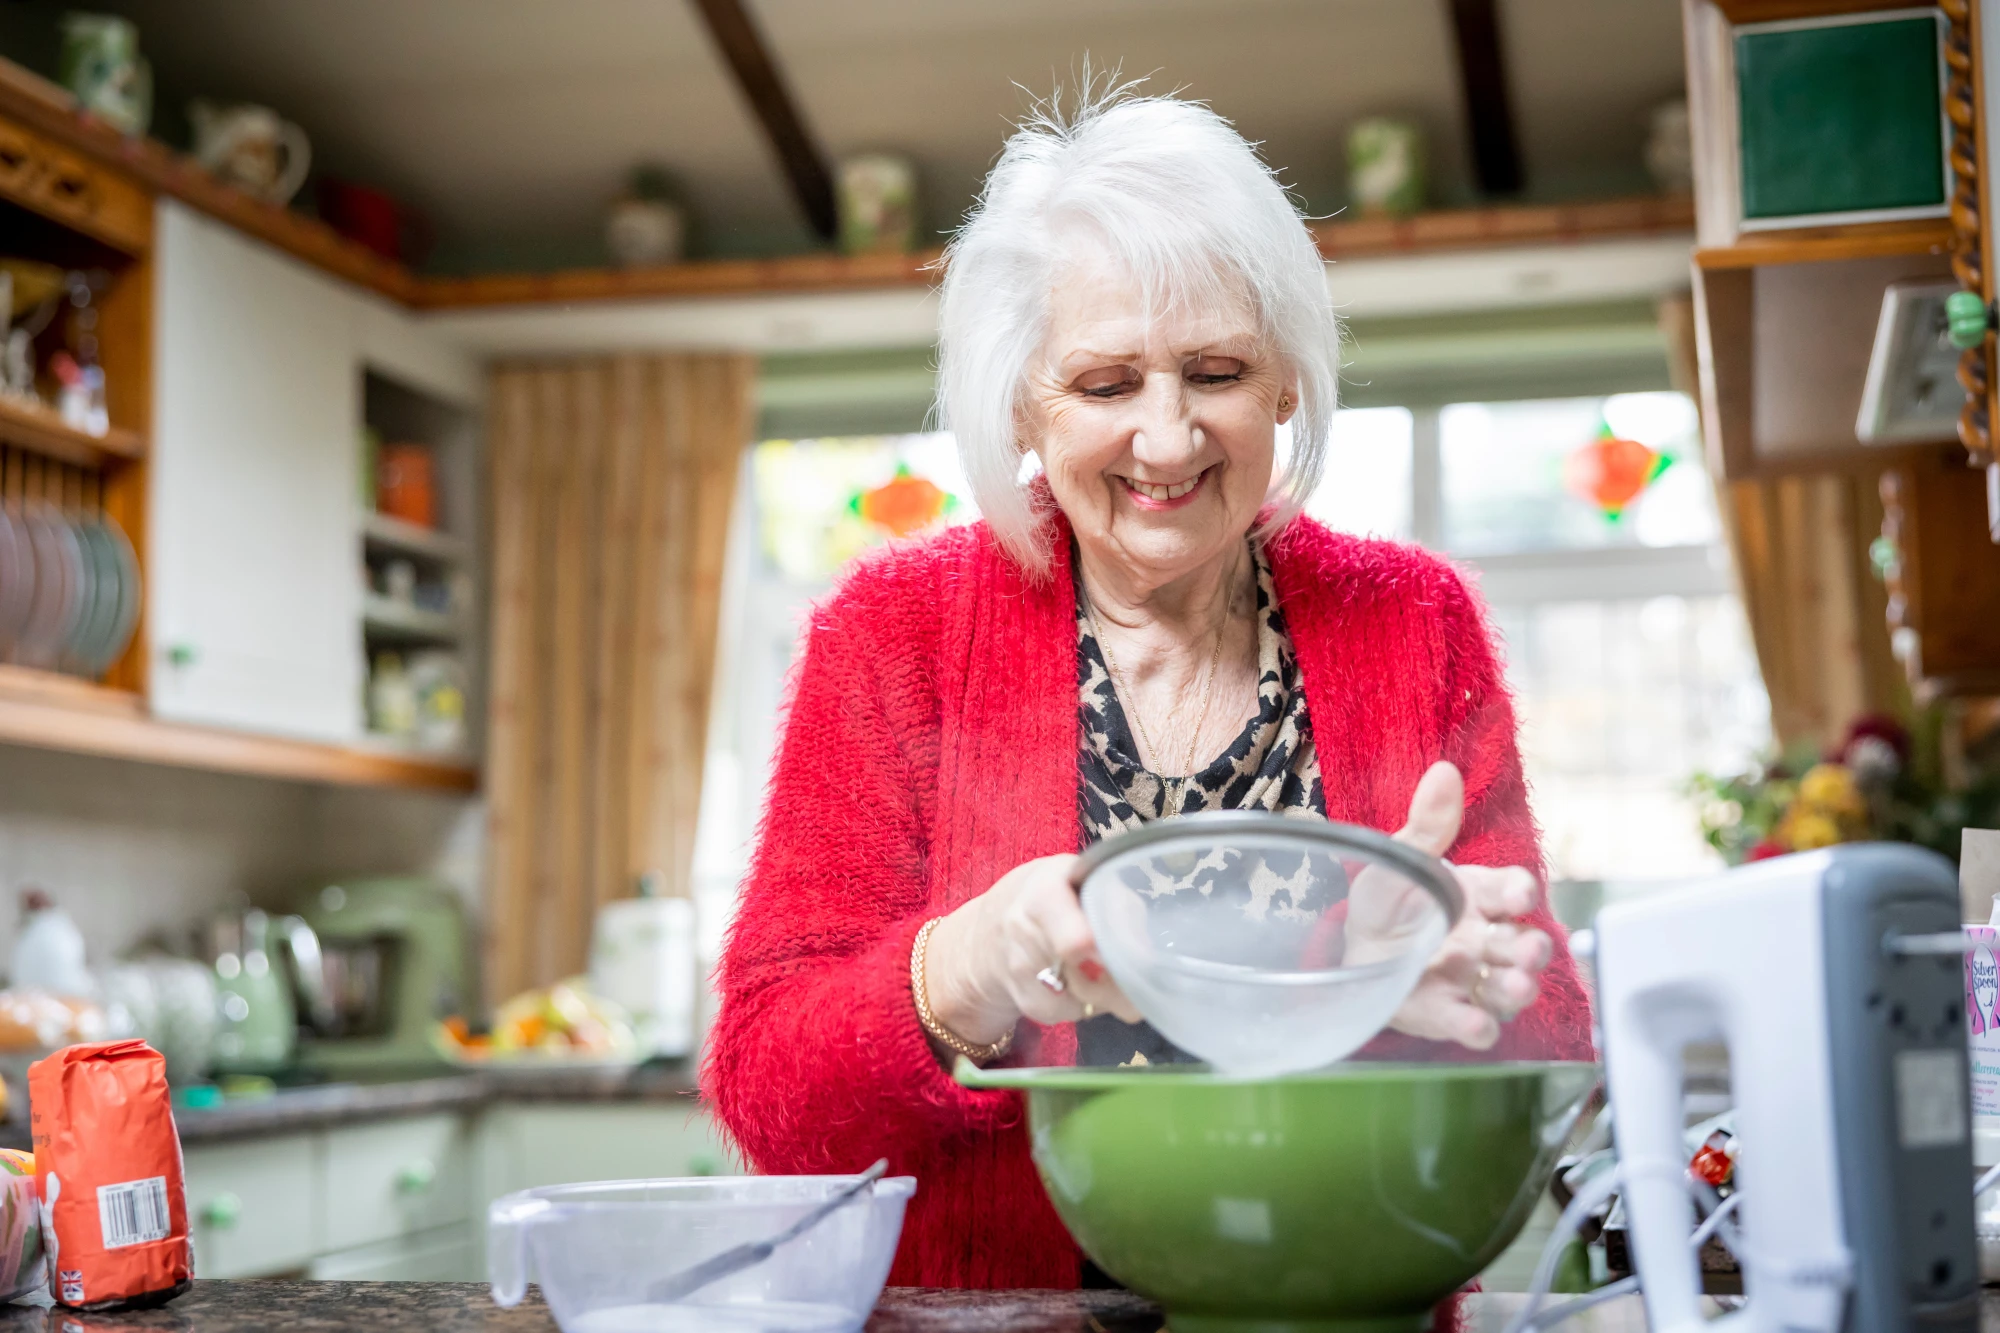 Smiling older woman doing some baking in her kitchen